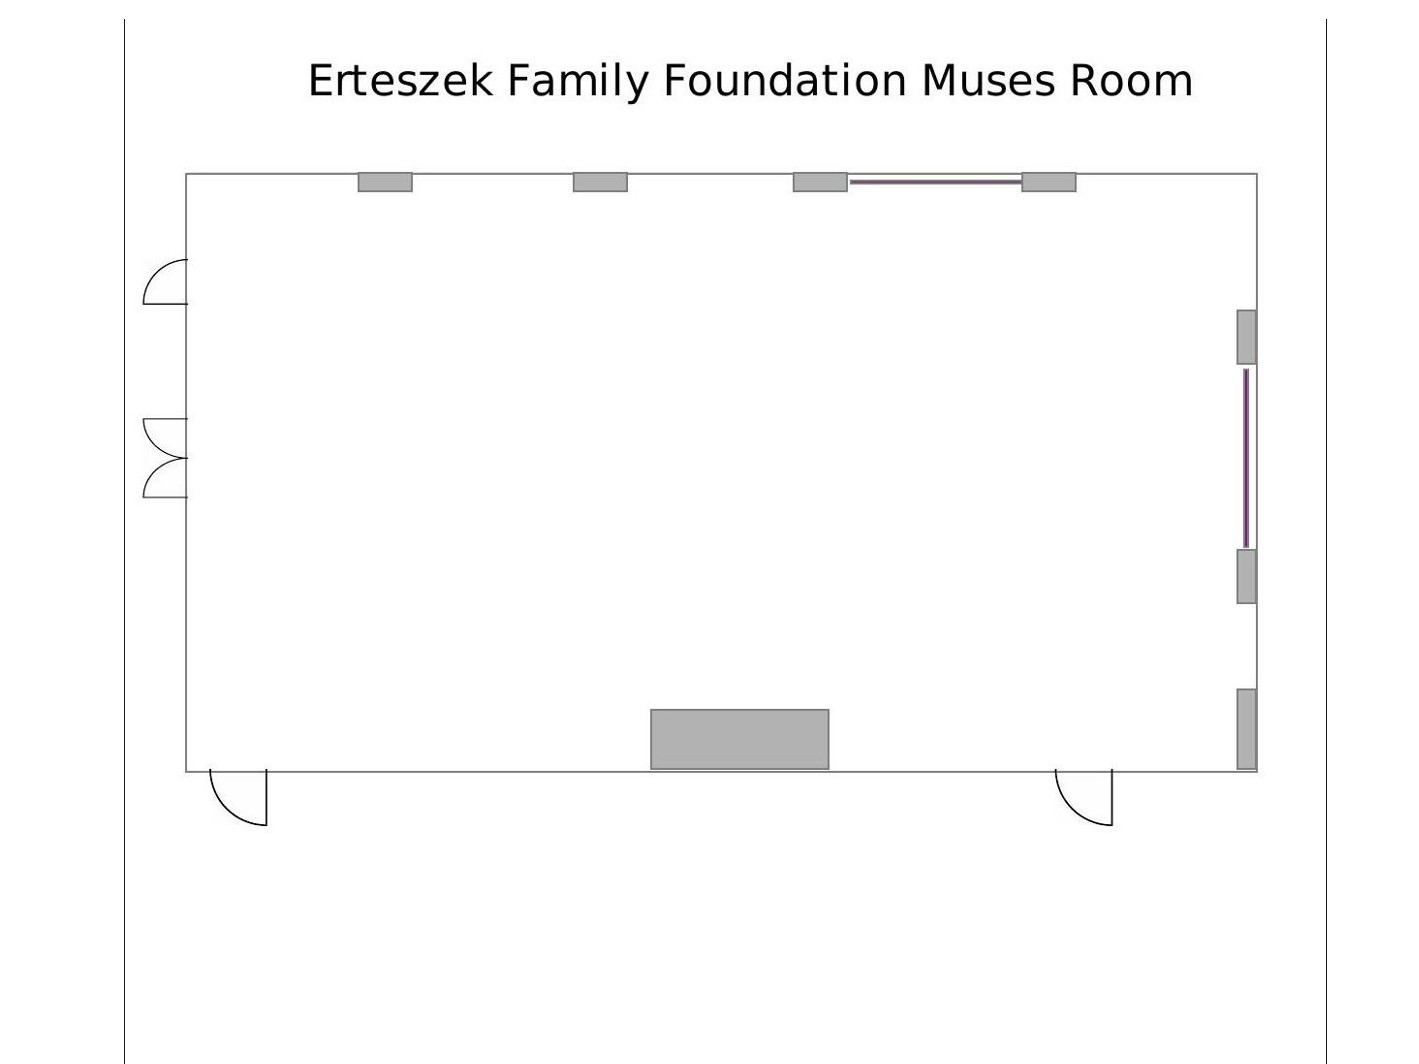 Blank Venue Diagram of the MUSES Room